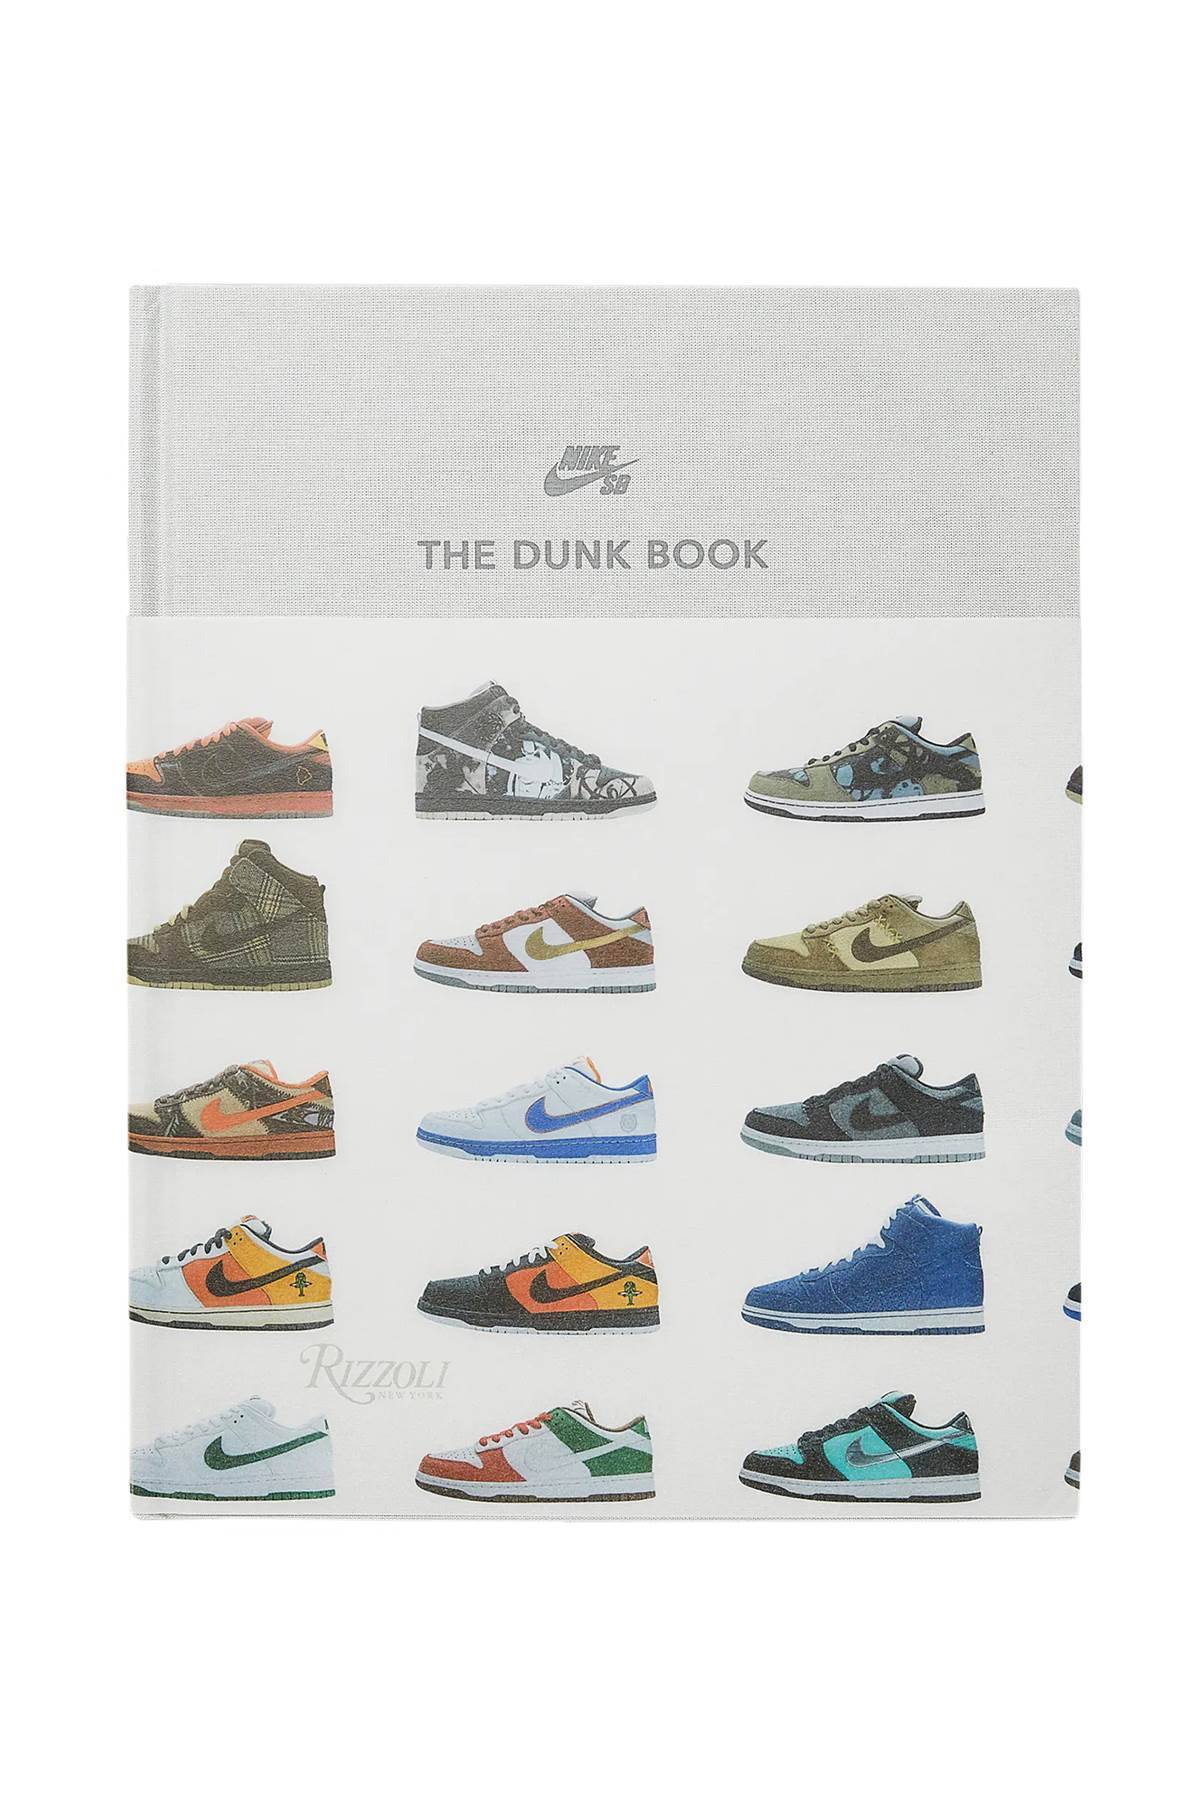 NEW MAGS NEW MAGS nike sb: the dunk book